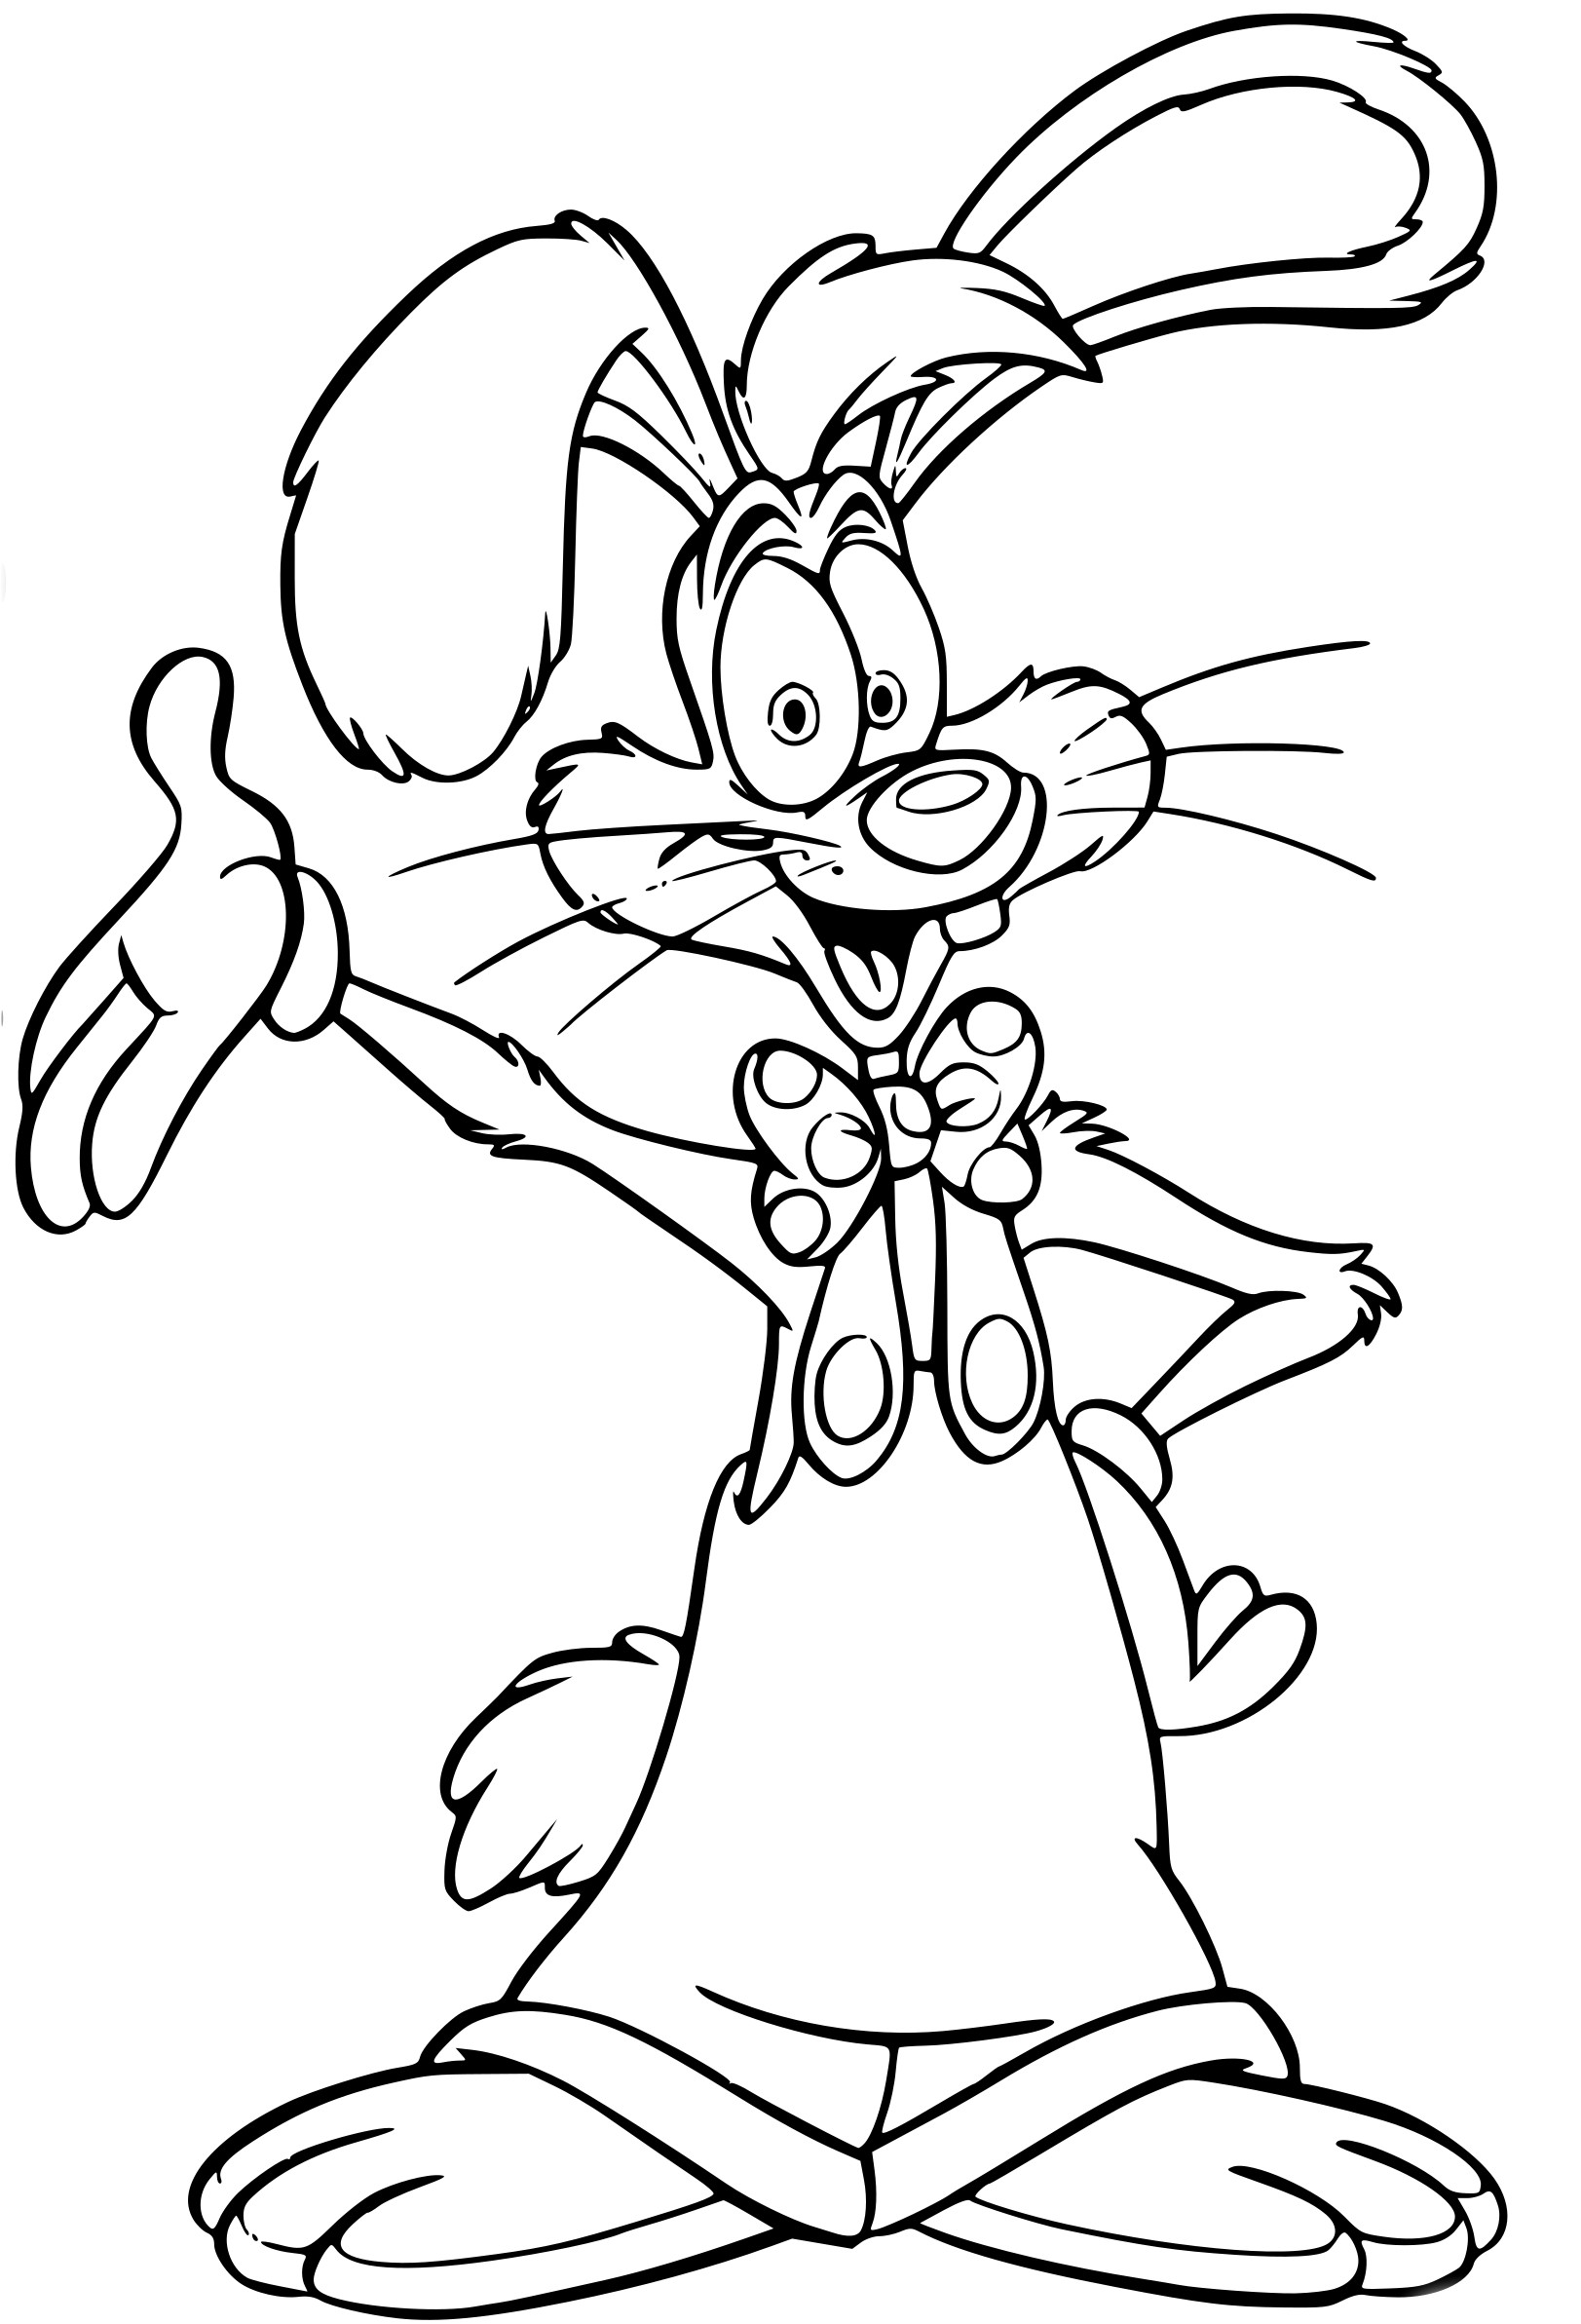 Roger Rabbit coloring page